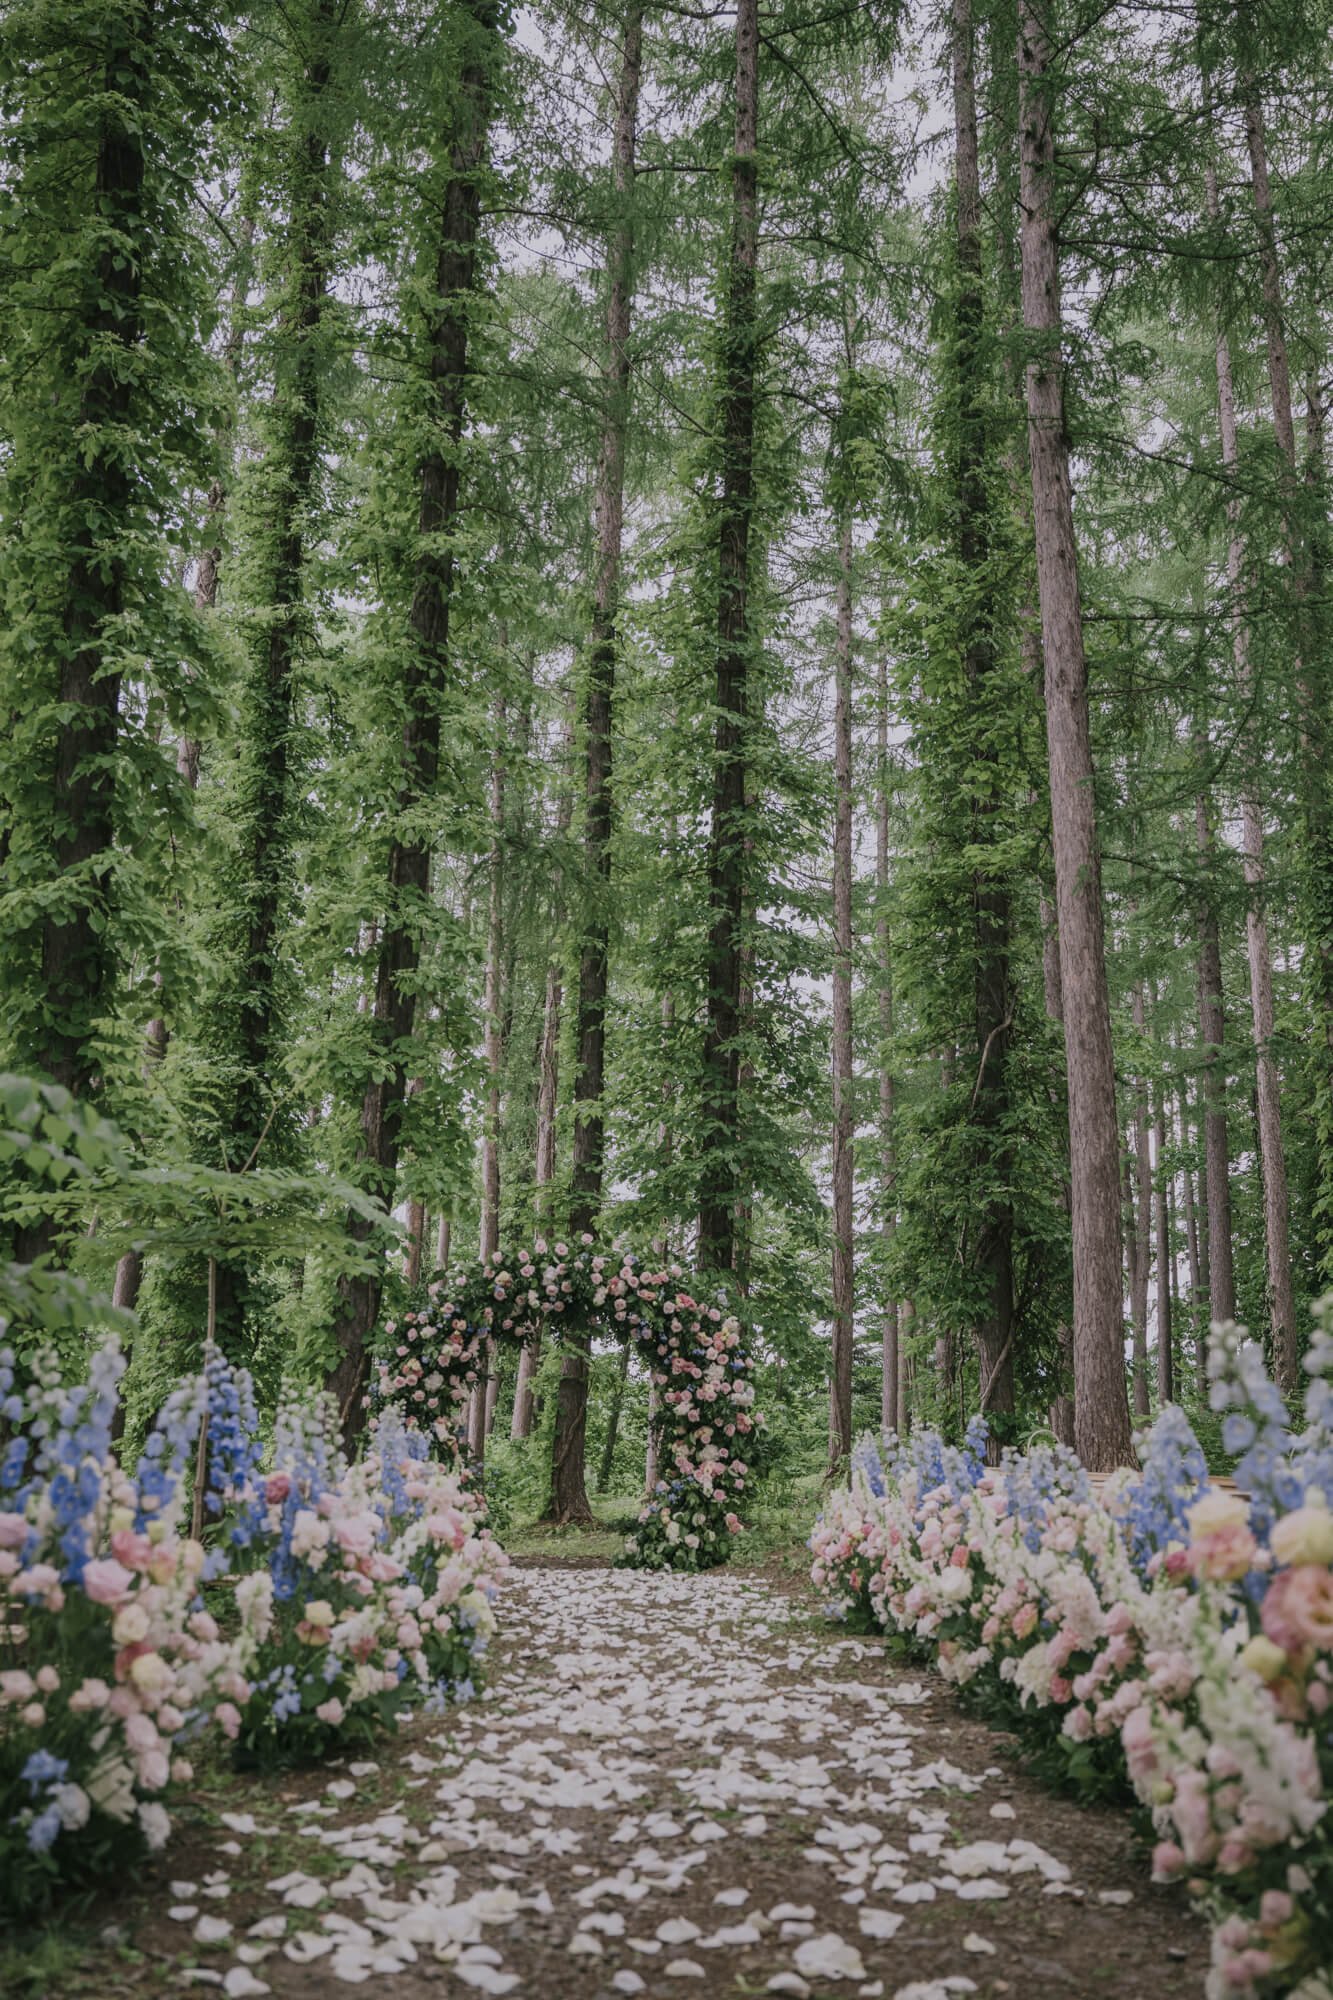 Floral wedding aisle with tall trees